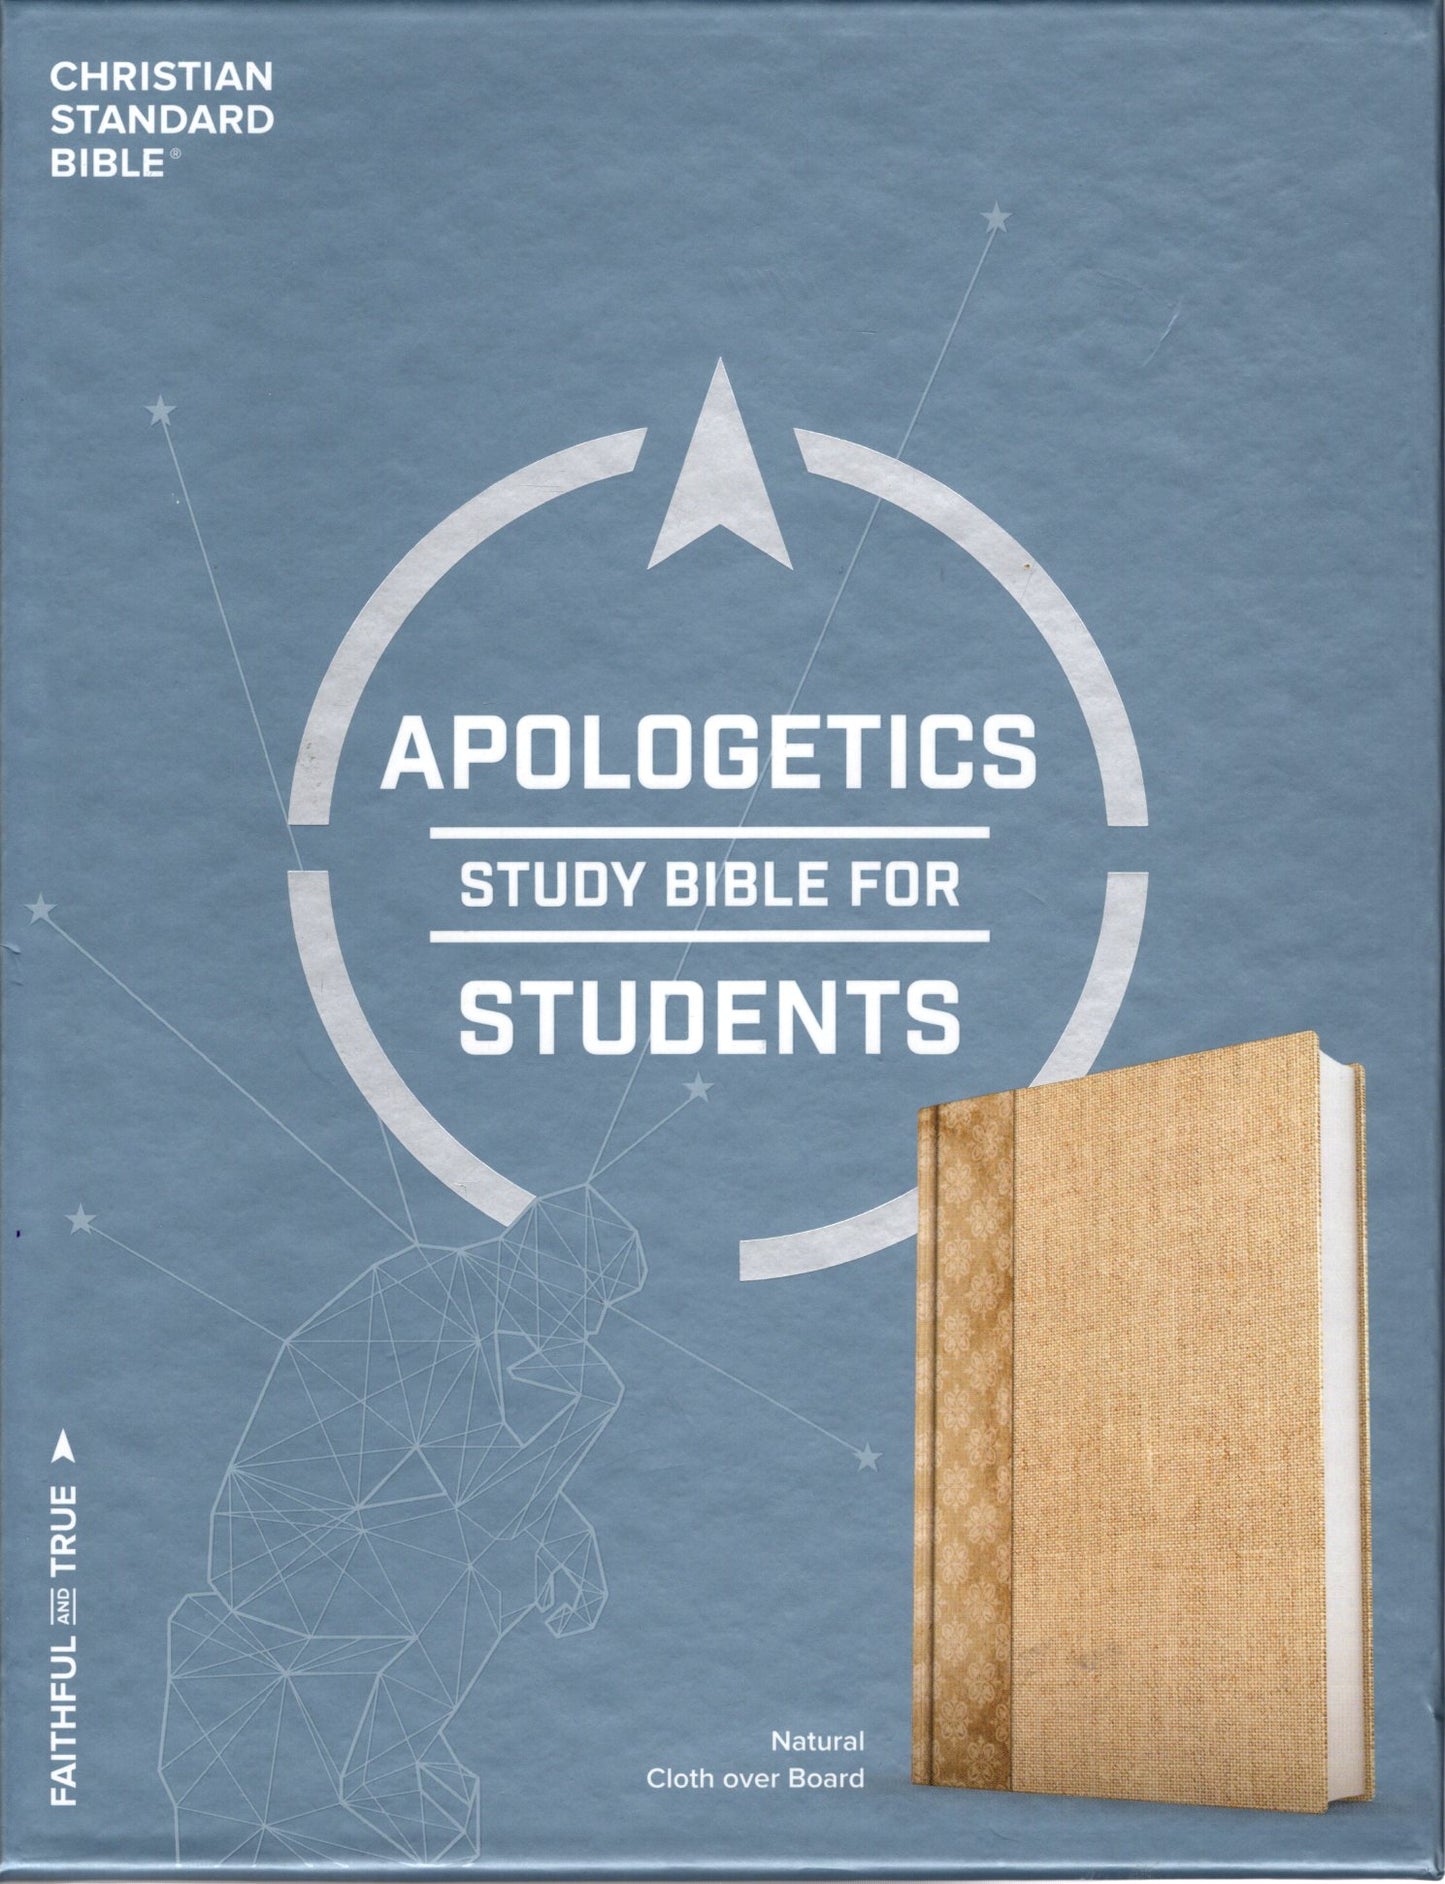 Holman® CSB® Apologetics Study Bible for Students - Hardcover, Cloth over Board (Natural)